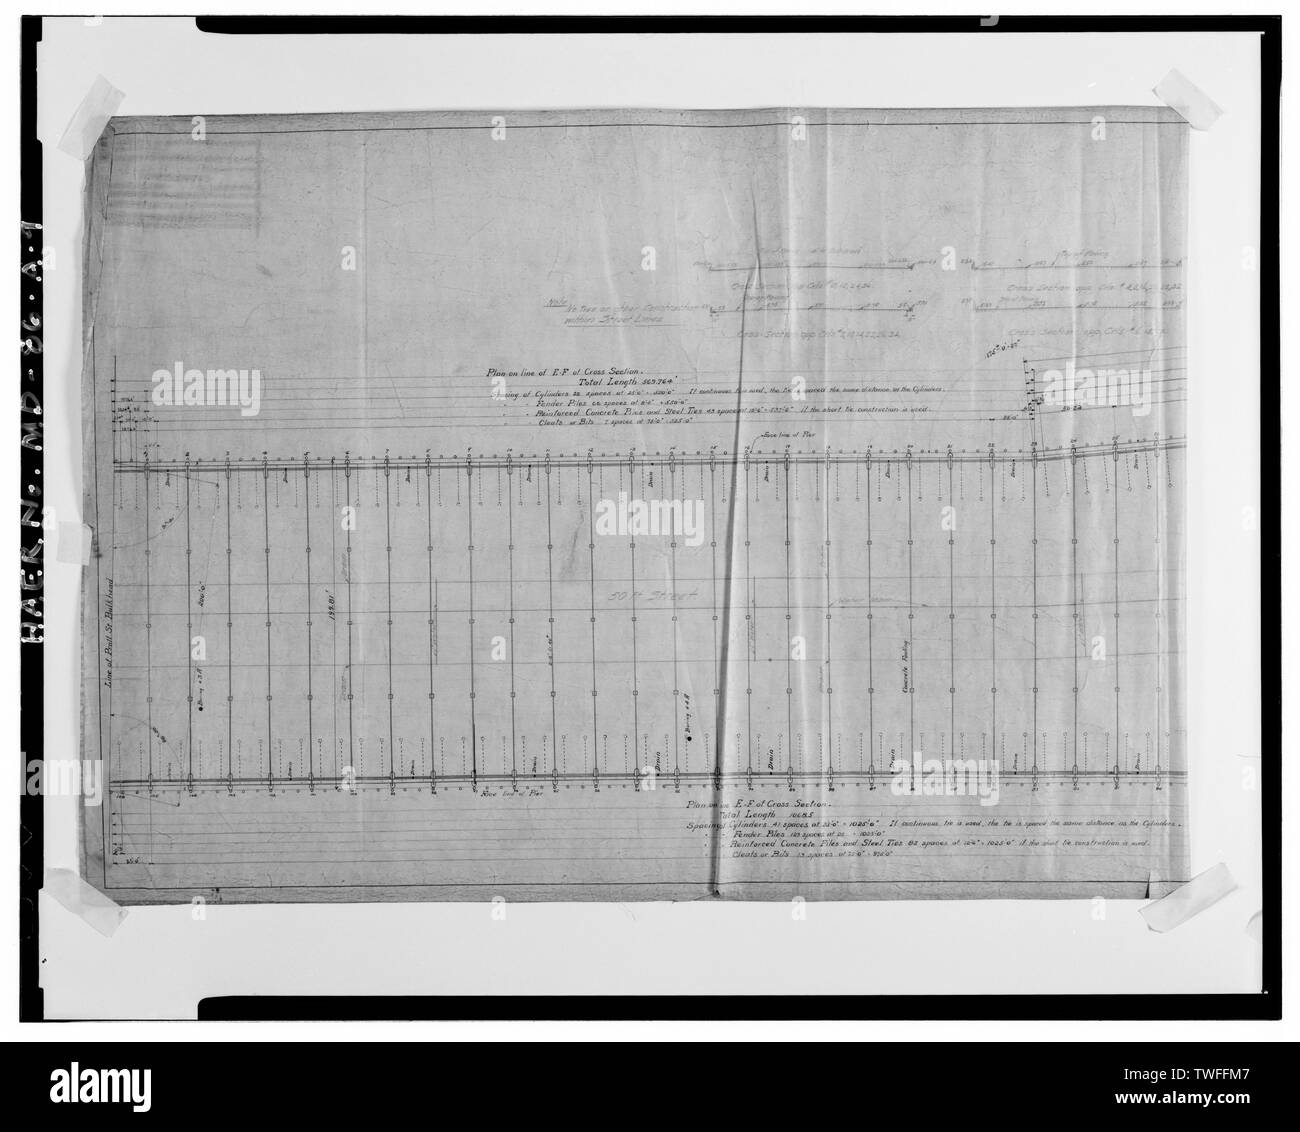 PLAN- CONSTRUCTION- PIER 5, DWG. NO. 5, FEB. 10, 1908, 1-20 = 1 FT. (NORTH PORTION OF PIER) - Baltimore Inner Harbor, Pier 5, South of Pratt Street between Market Place and Concord Street, Baltimore, Independent City, MD; Lackey, Oscar F; Baltimore Harbor Board; Whitman, Requardt and Associates; Connolly's Seafood Restaurant; Harrison's Pier 5; City of Baltimore; Christopher Columbus Center Development, Incorporated, sponsor; Hoachlander, Anice, photographer; Bird, Betty, historian; Hoachlander, Anice, photographer Stock Photo